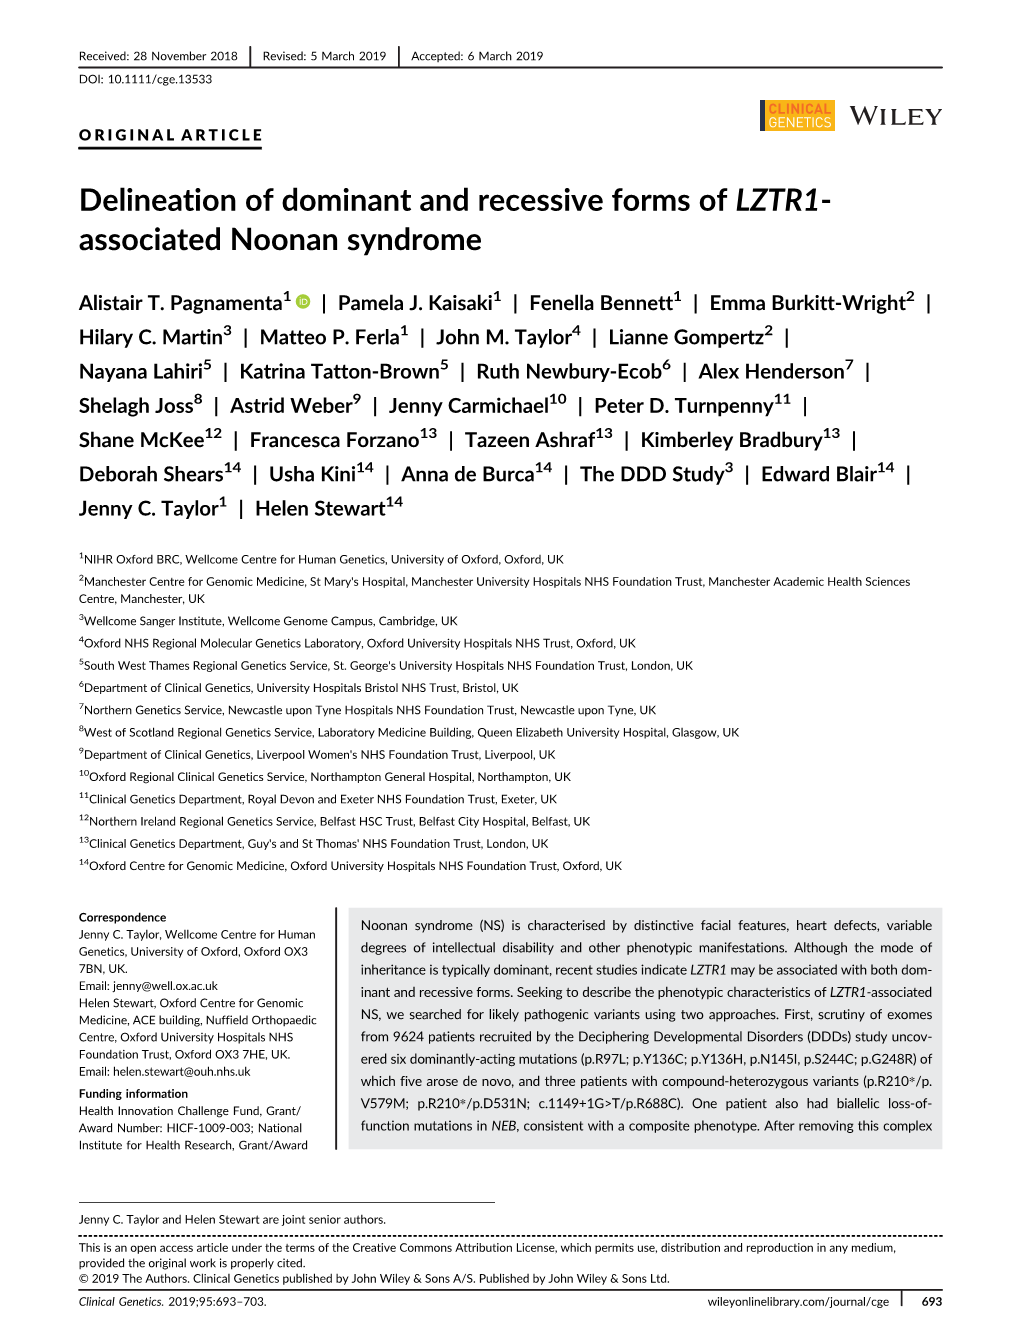 Delineation of Dominant and Recessive Forms of LZTR1- Associated Noonan Syndrome